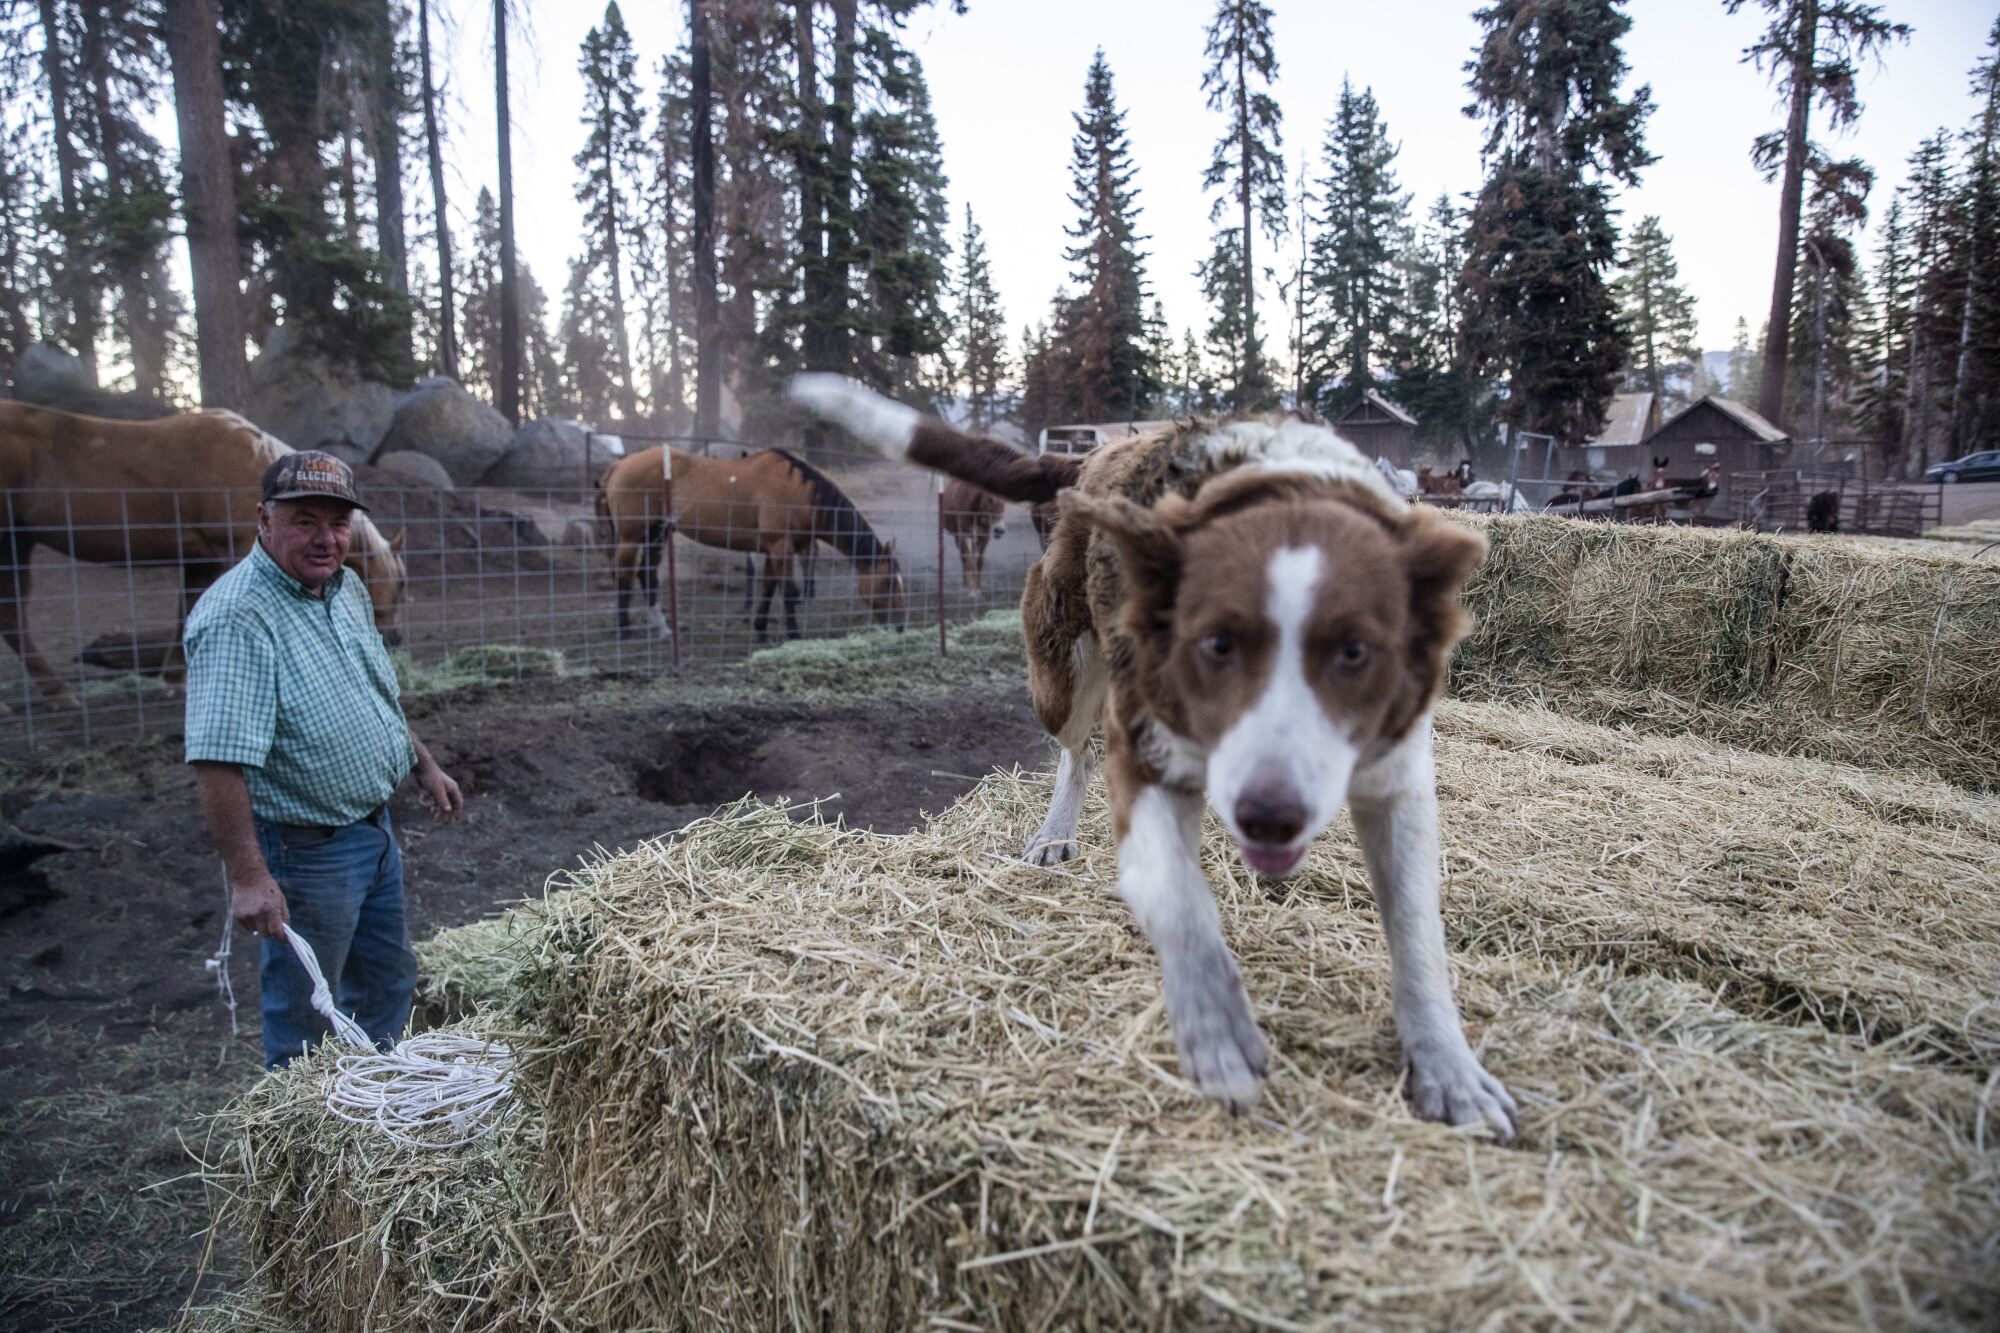 A man looking at a dog standing on stacks of hay